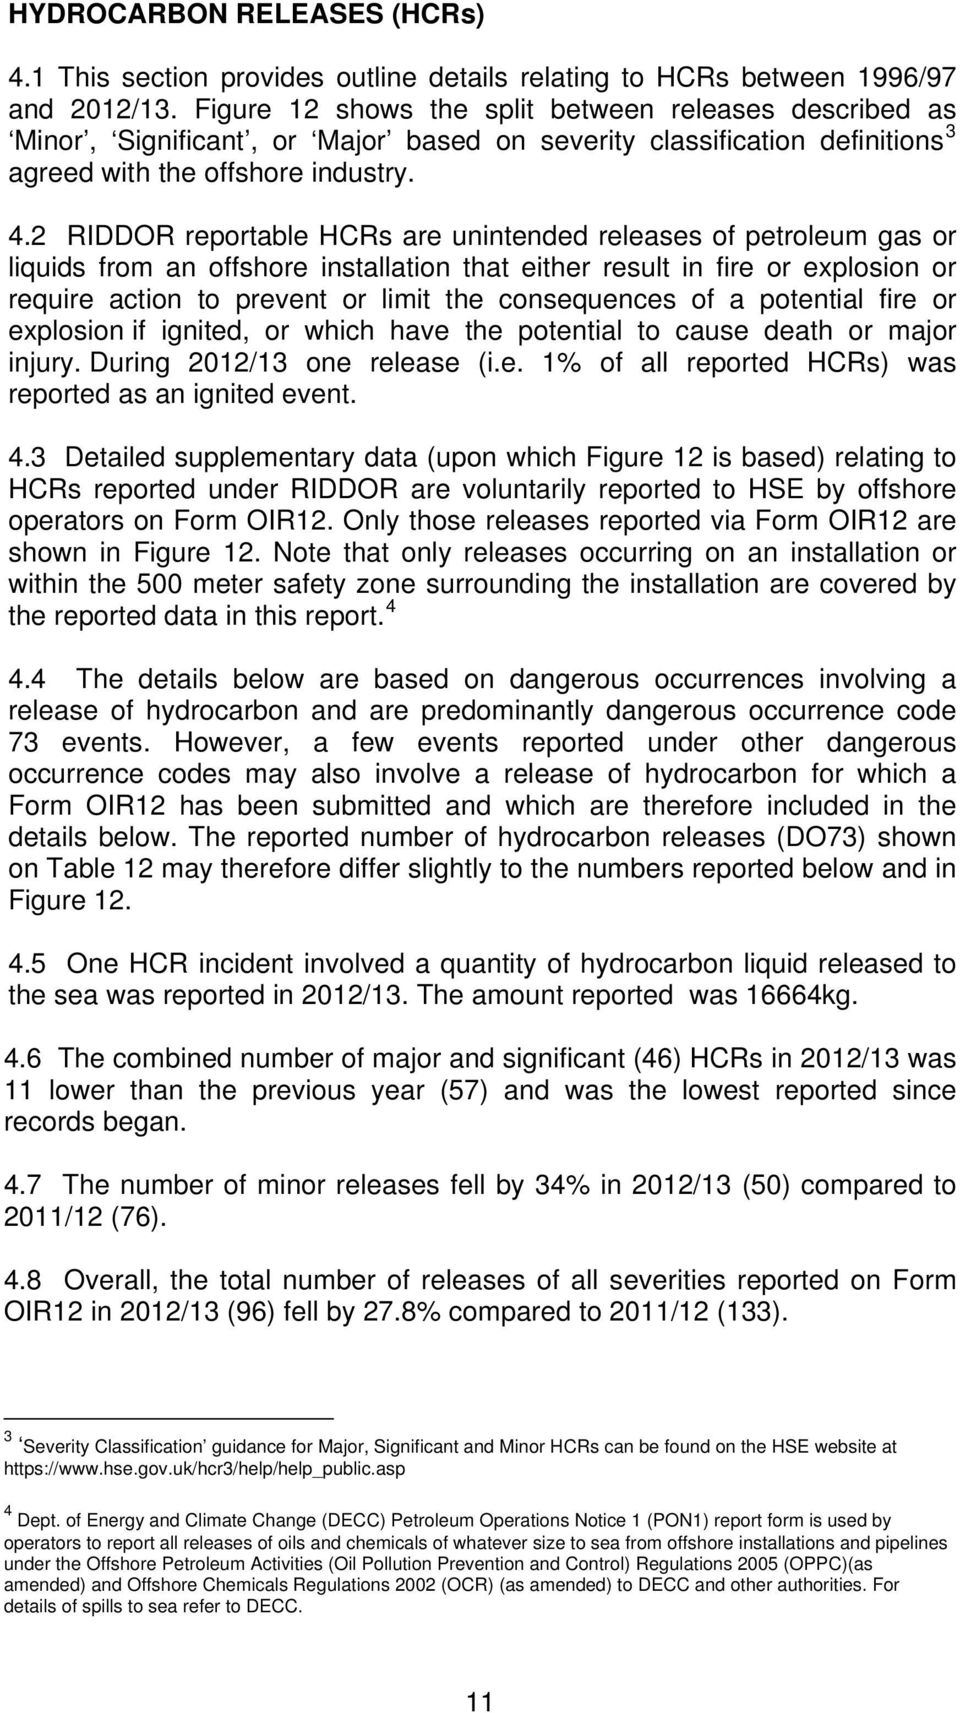 2 RIDDOR reportable HCRs are unintended releases of petroleum gas or liquids from an offshore installation that either result in fire or explosion or require action to prevent or limit the